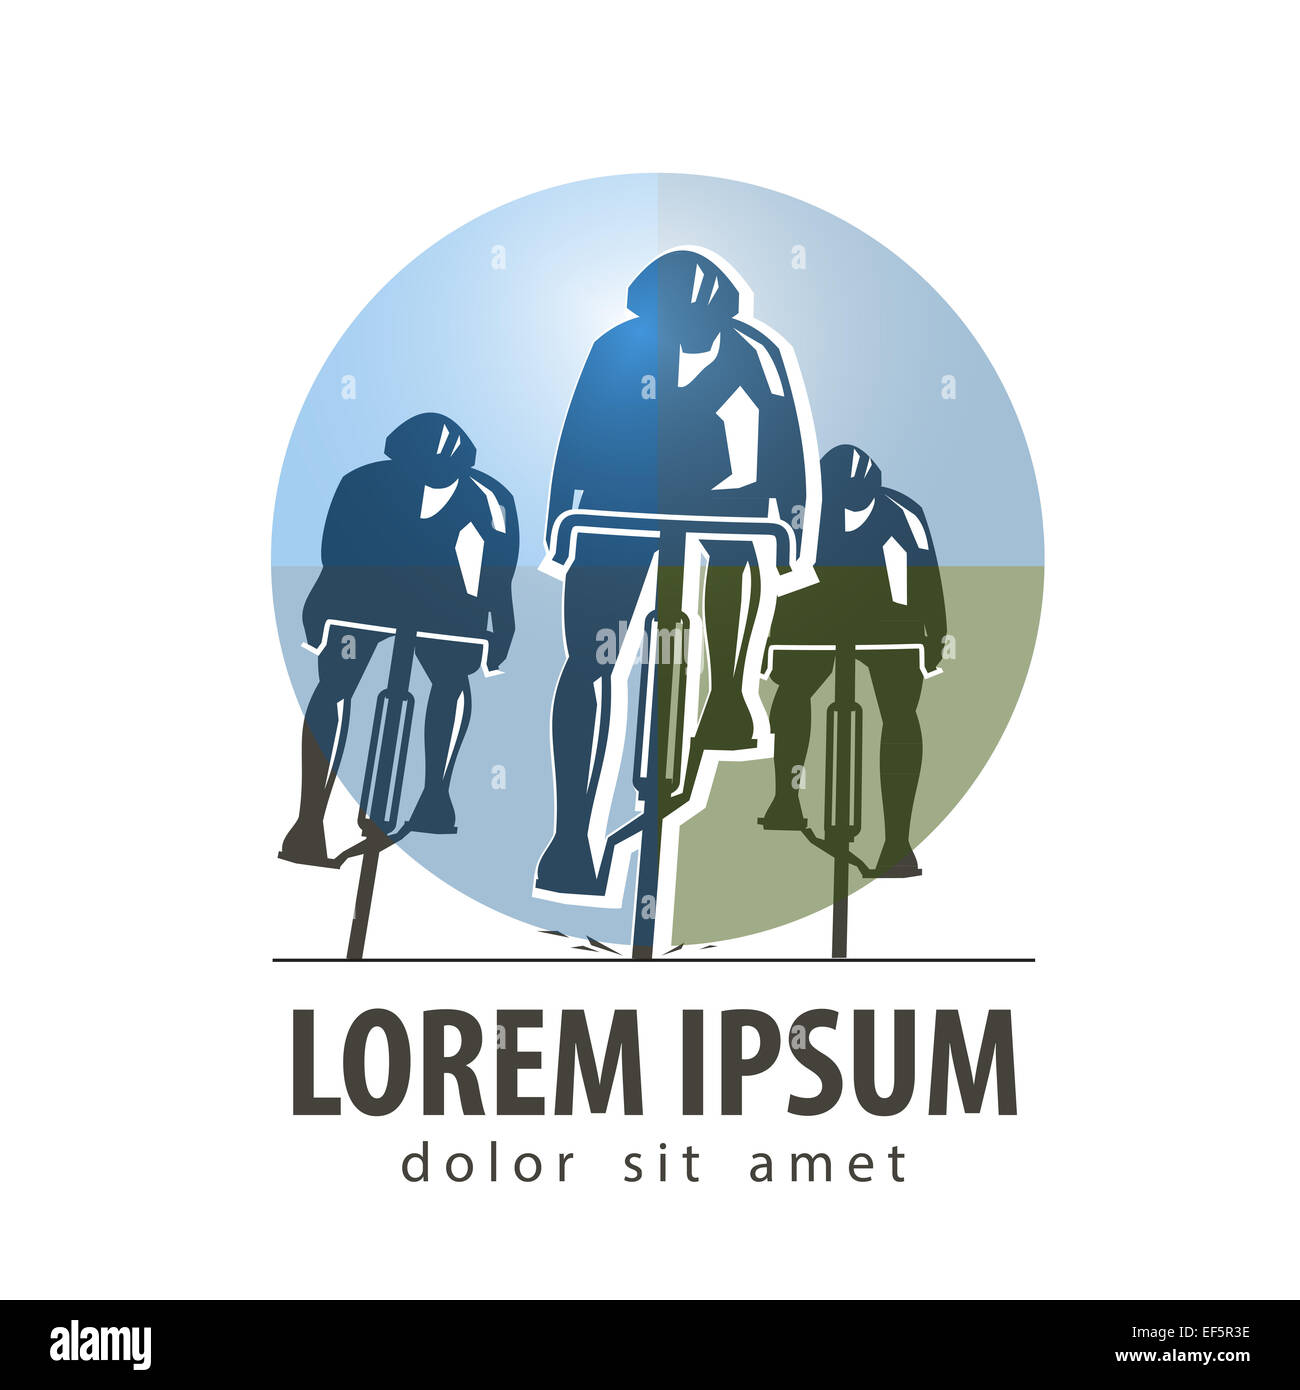 cycling vector logo design template. sports or bike icon Stock Photo